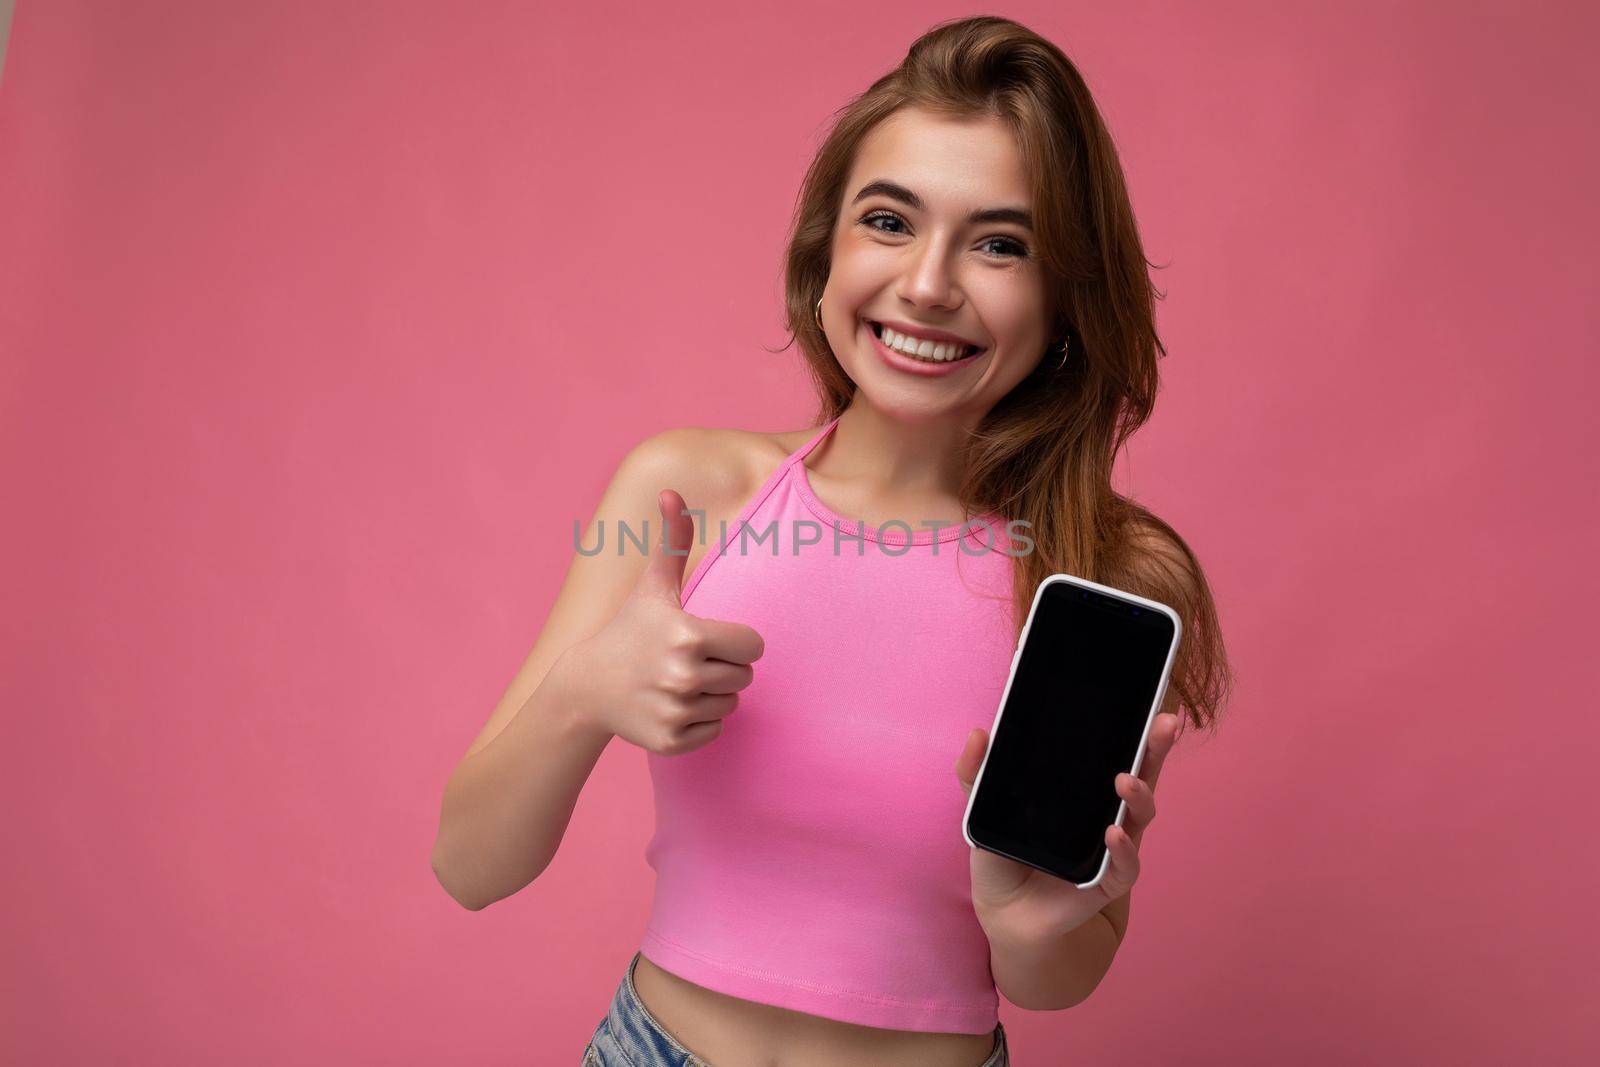 Beautiful joyful young blonde woman wearing pink top poising isolated on pink background with empty space holding in hand and showing mobile phone with empty display for mockup looking at camera and showing thumbs up gesture.